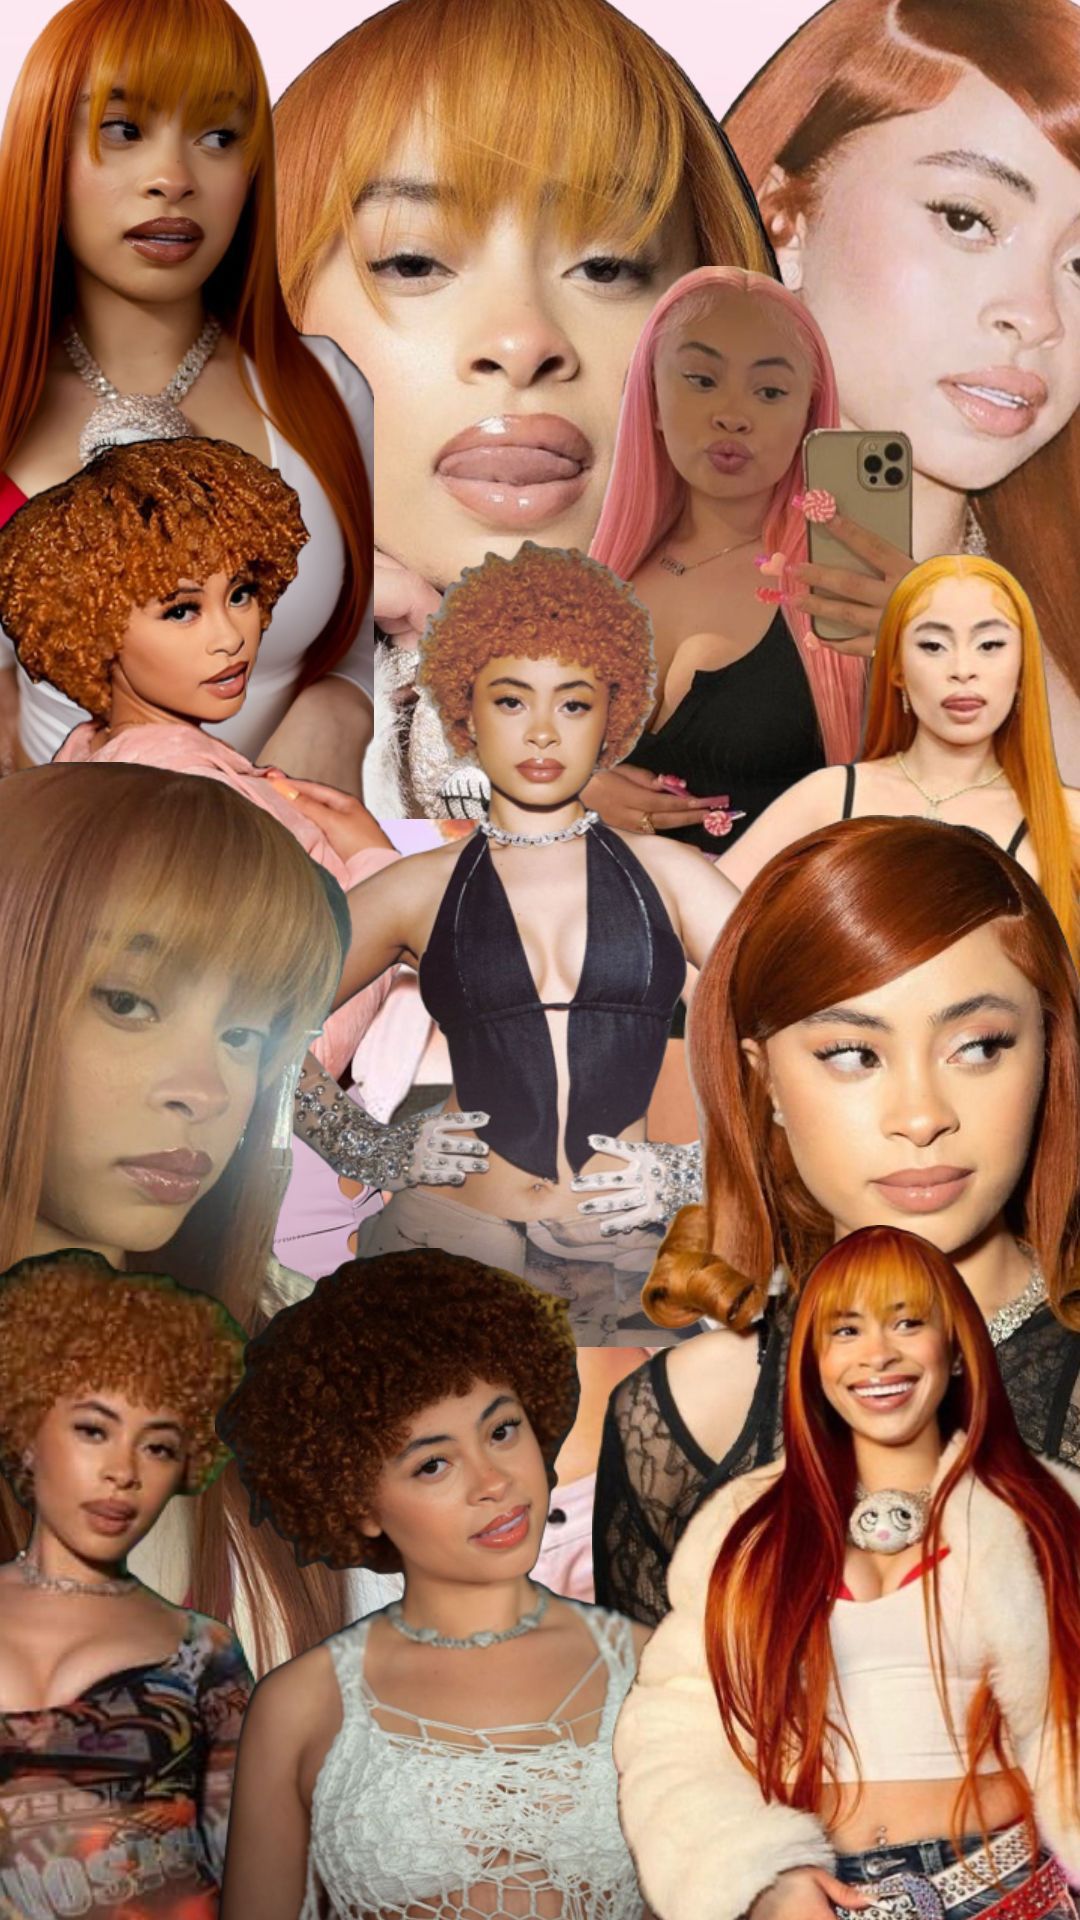 I made a collage of my favorite pictures of Bhad Bhabie. - Ice Spice